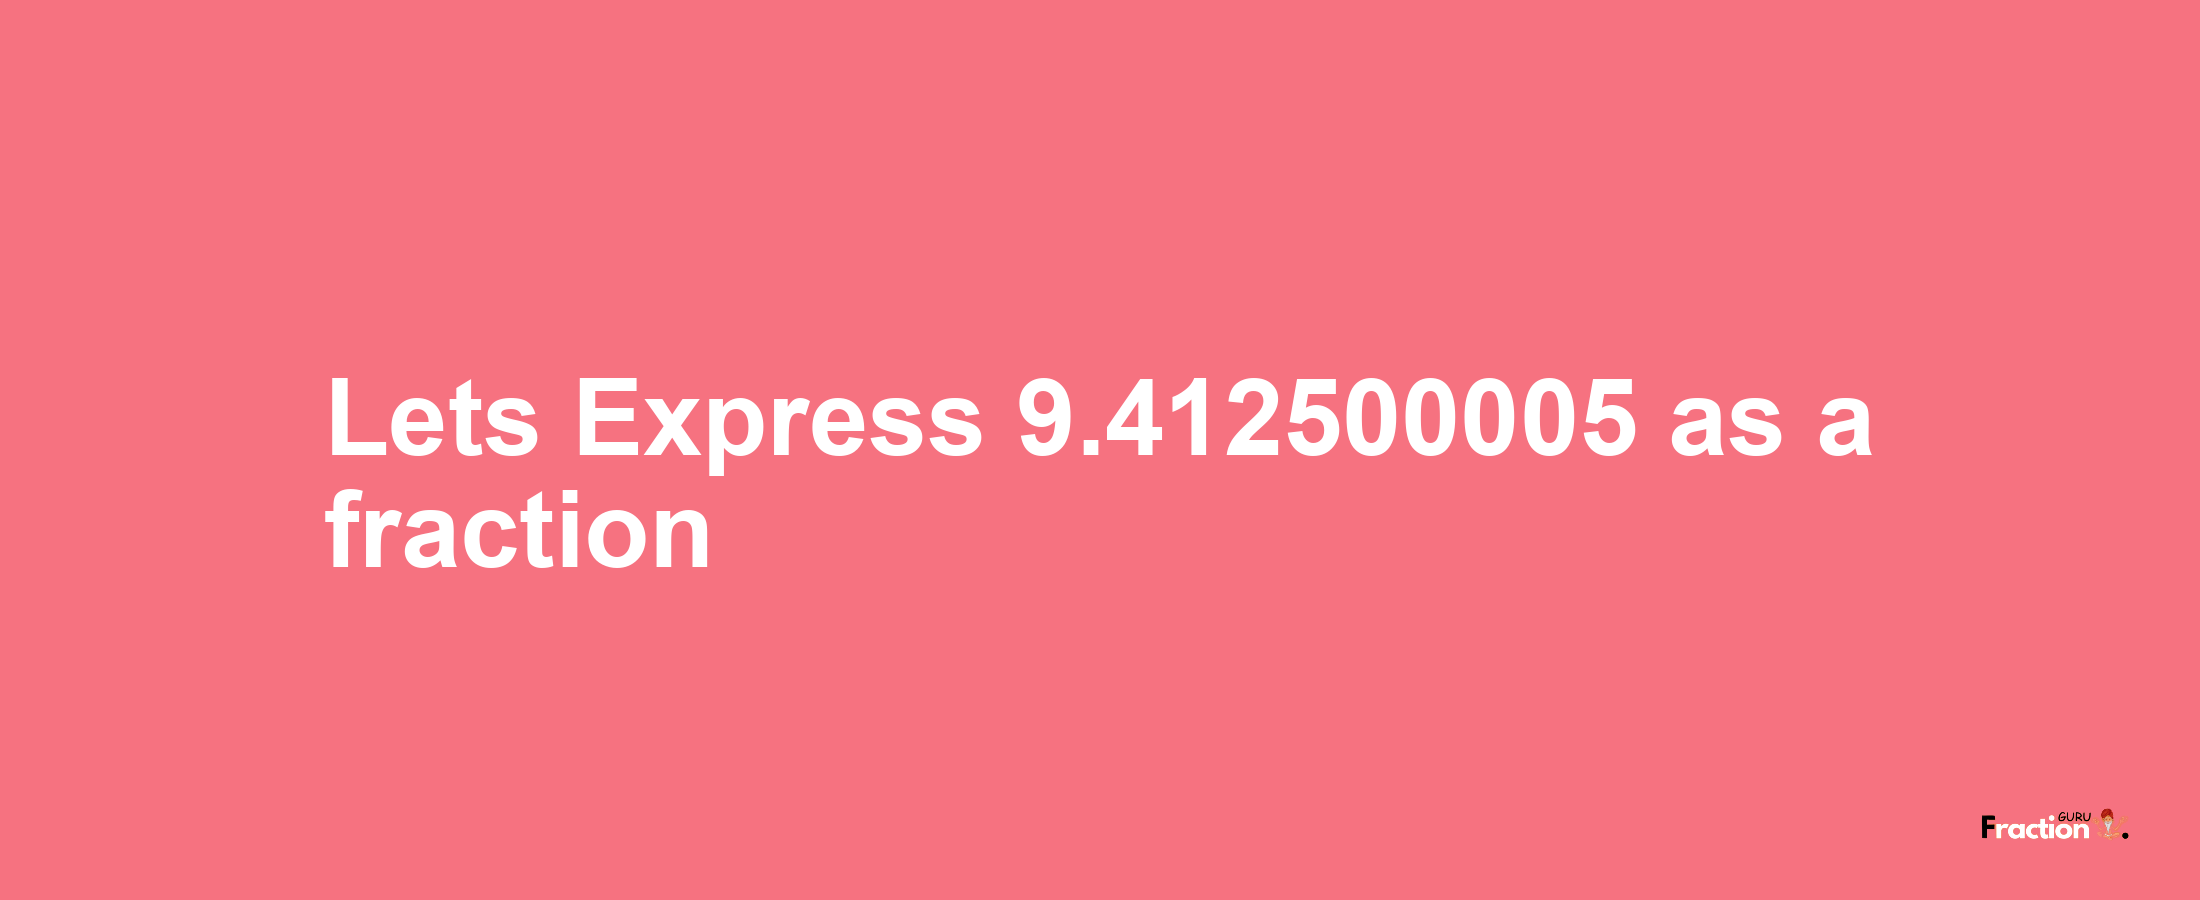 Lets Express 9.412500005 as afraction